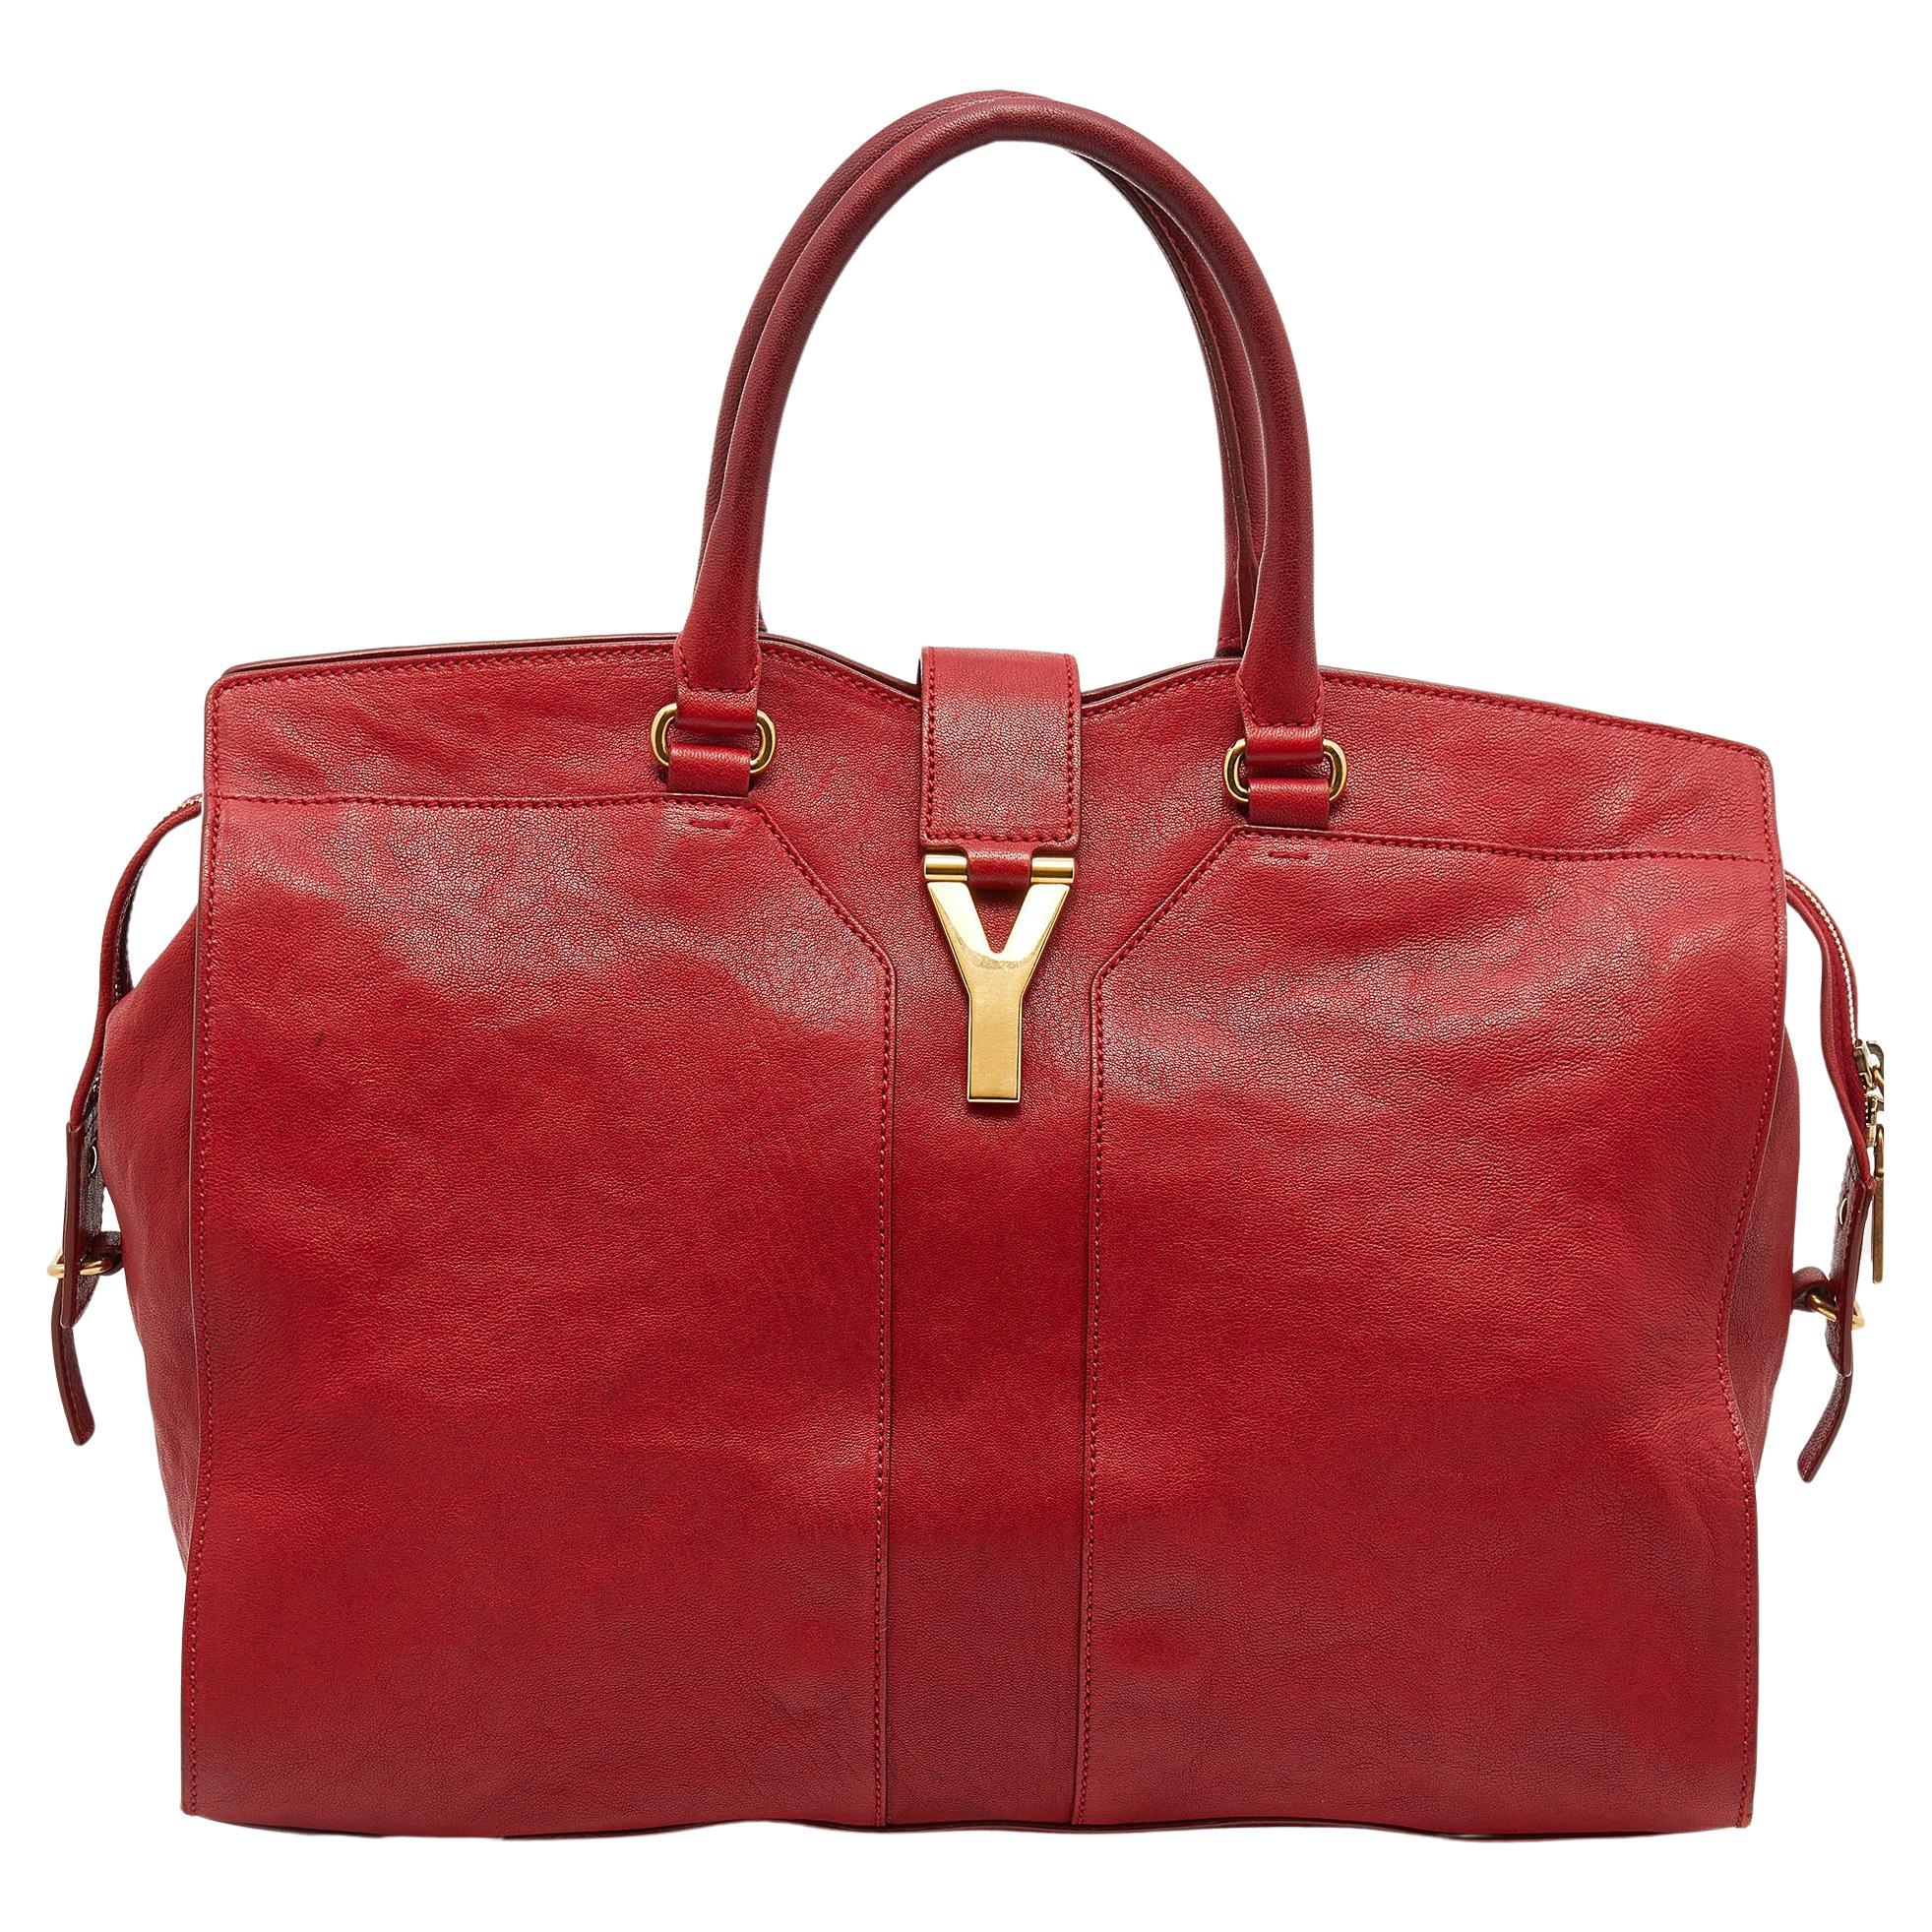 Yves Saint Laurent Red Leather Large Y Cabas Chyc Tote